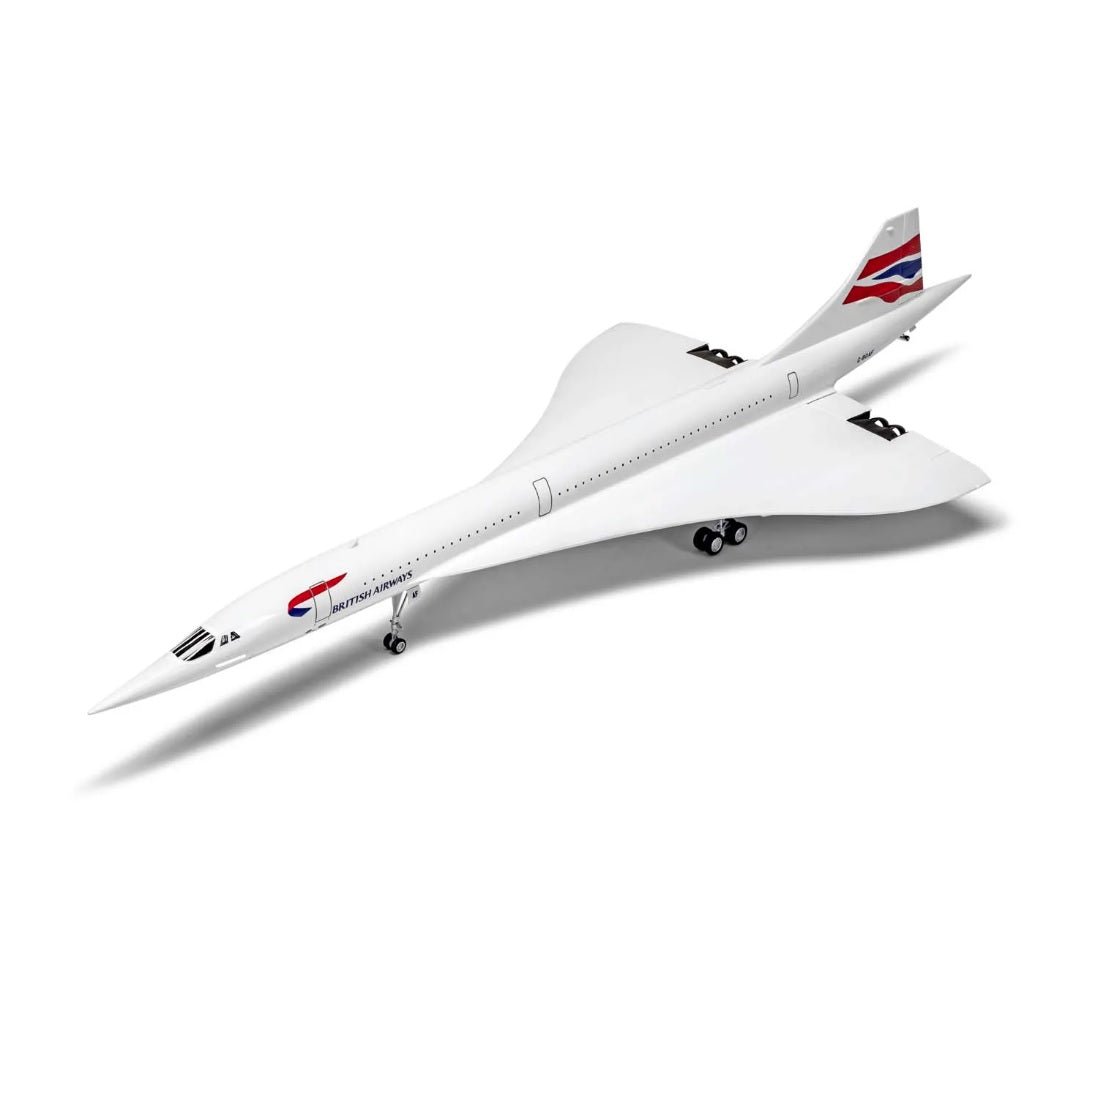 Airfix® "The Last Flight of the Concorde" Plastic Model Kit, 1/144 Scale